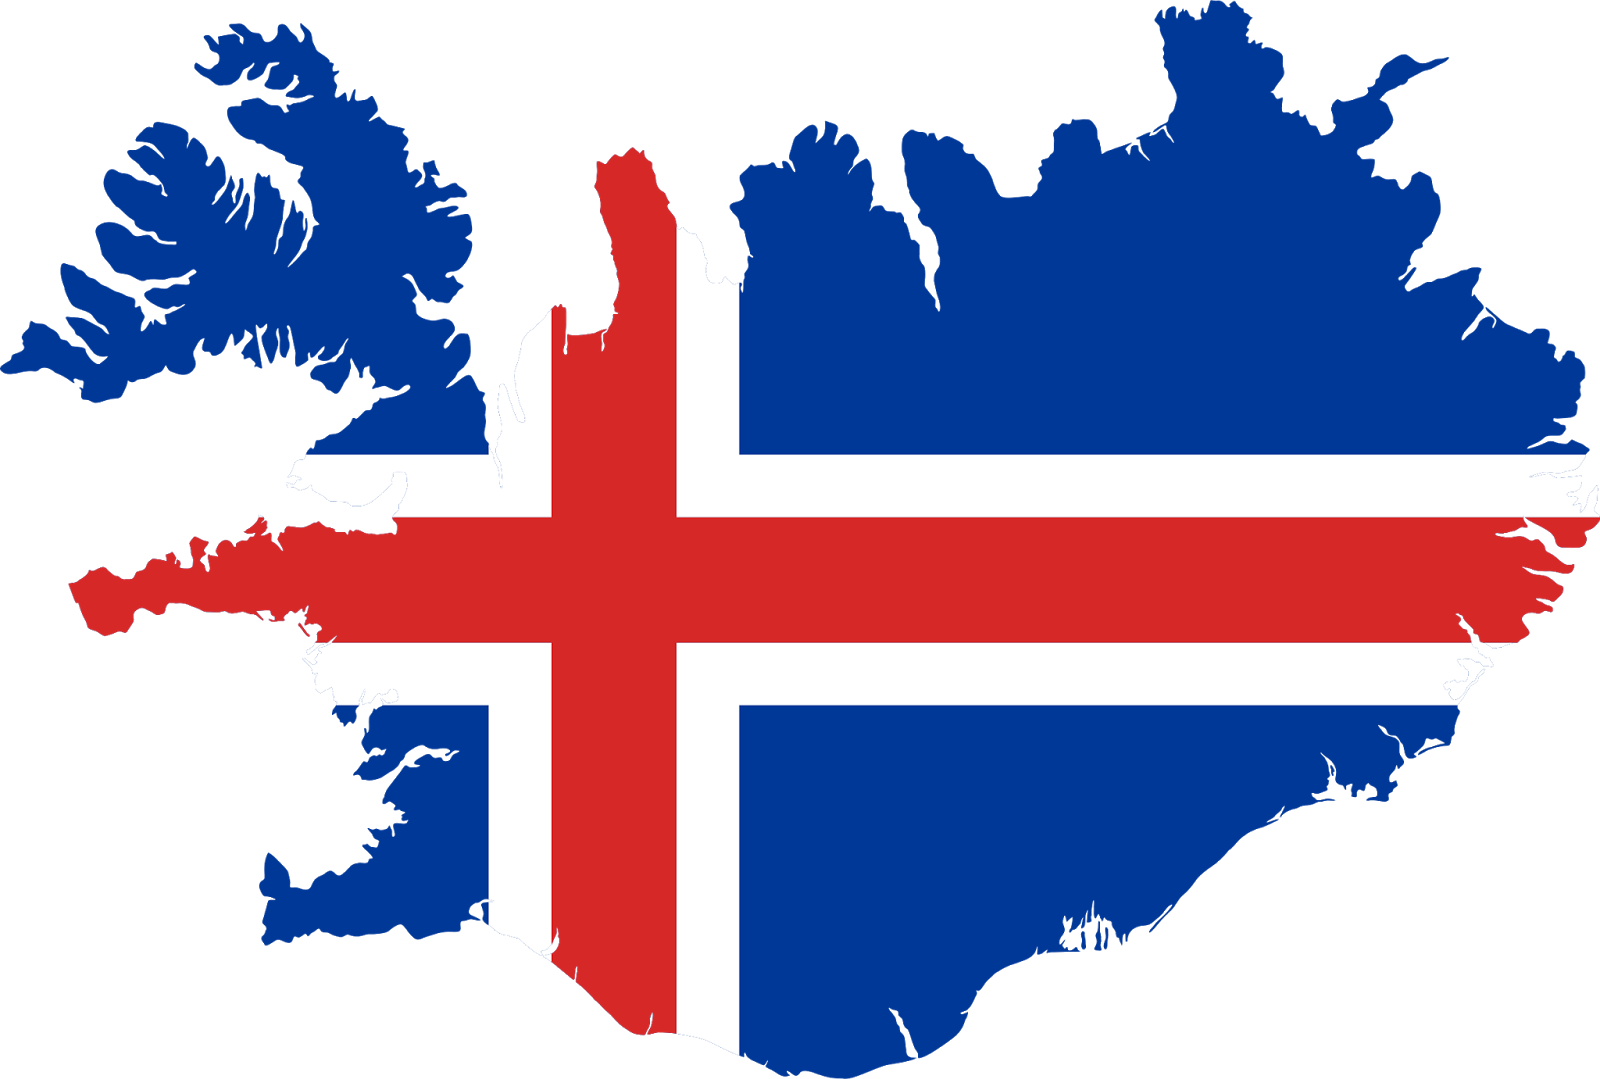 Iceland on a map with its flag colors